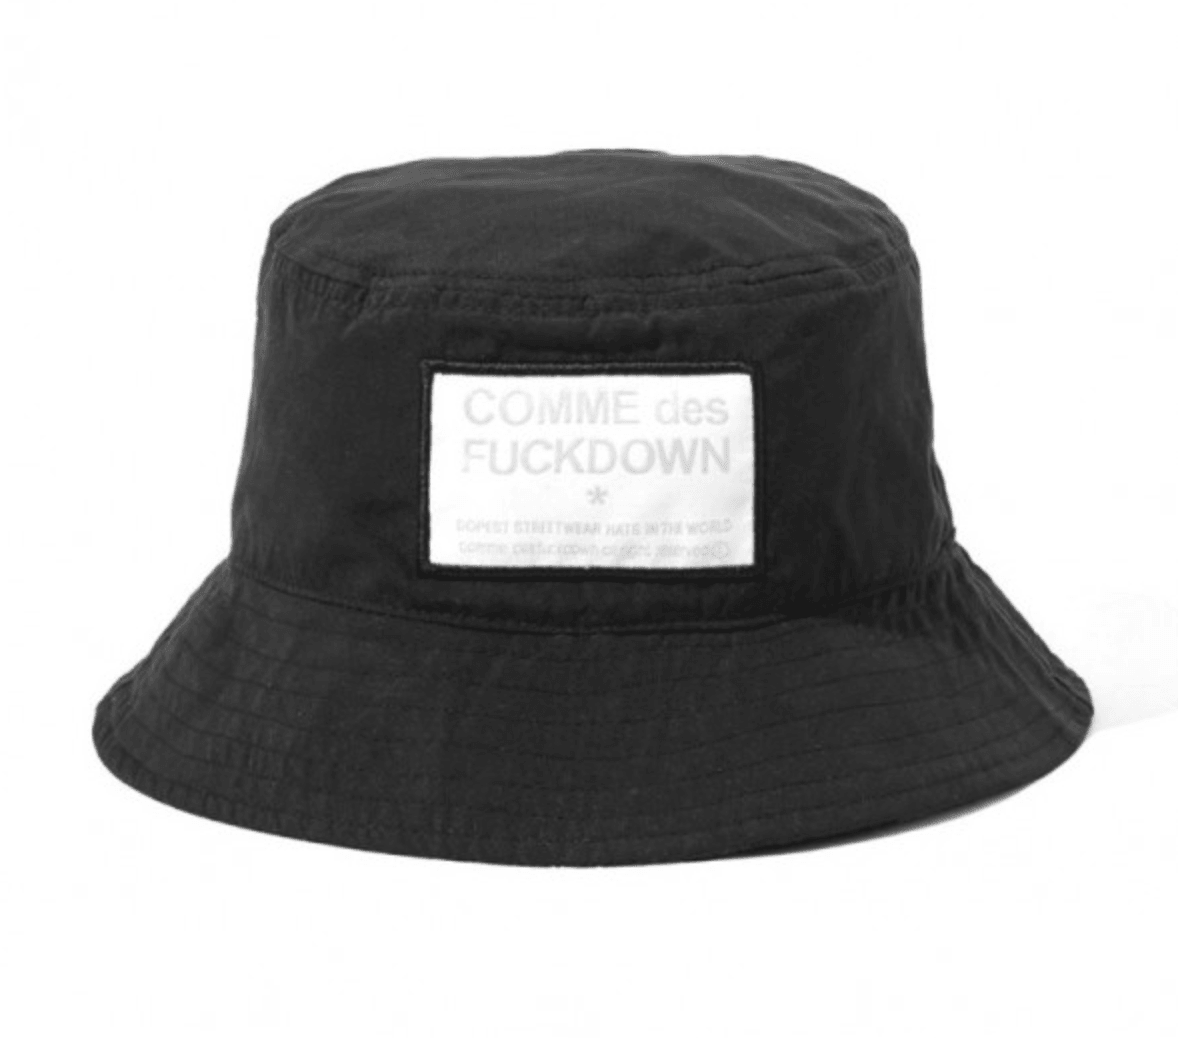 Comme Des Fuckdown Women's Black Polyester Hat - Designed by Comme Des Fuckdown Available to Buy at a Discounted Price on Moon Behind The Hill Online Designer Discount Store